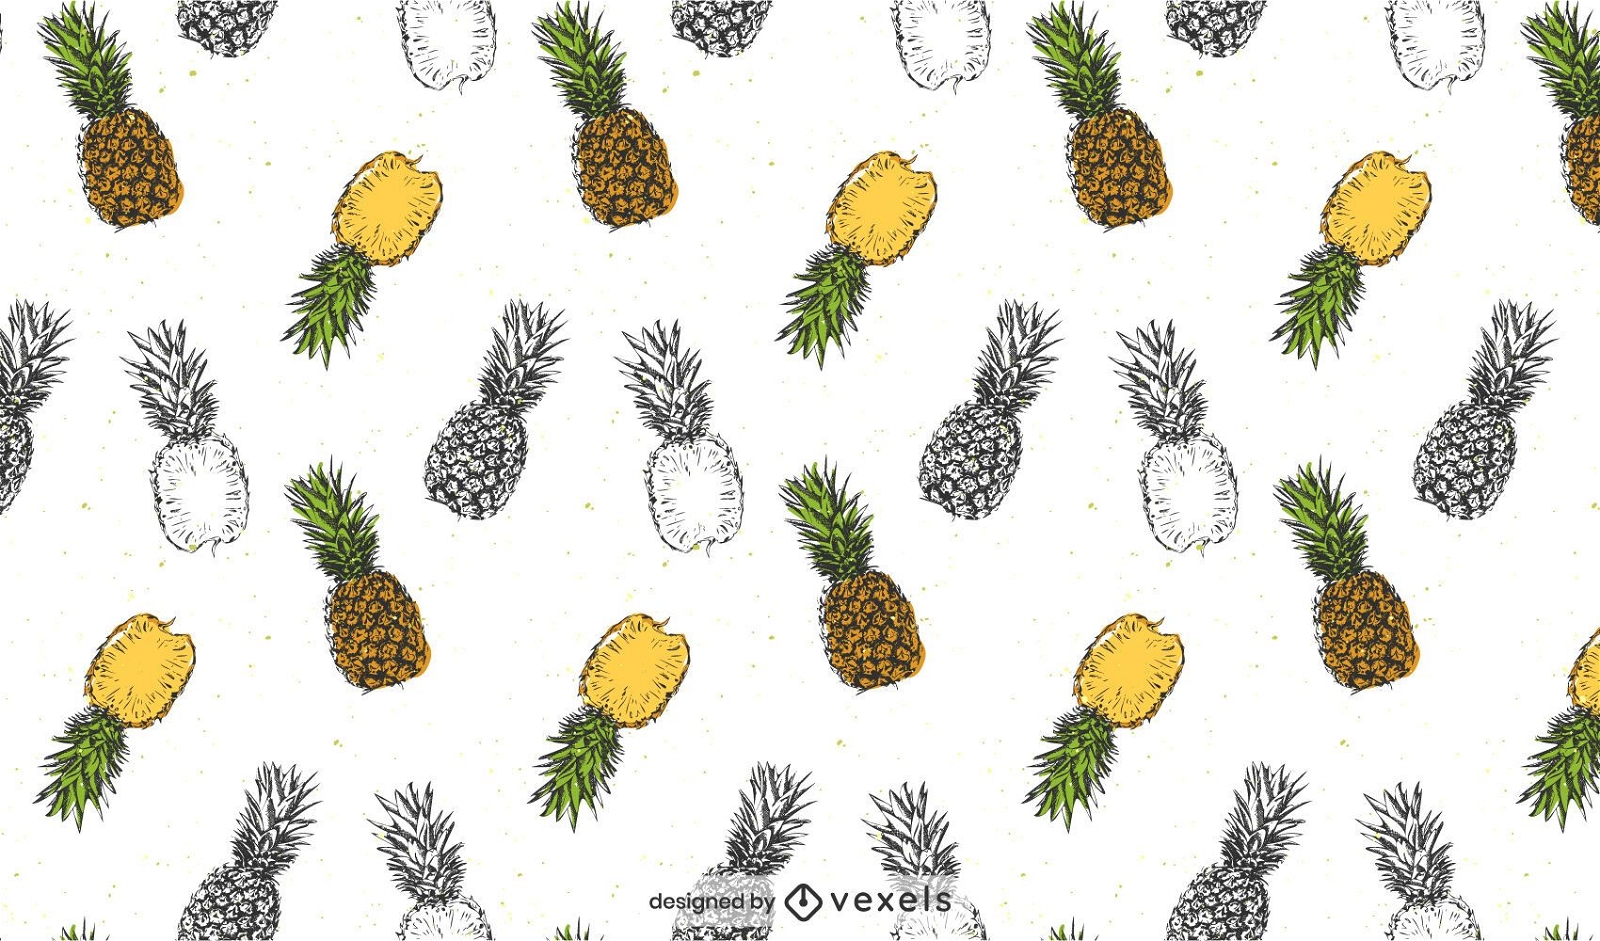 Realistic pineapples pattern design